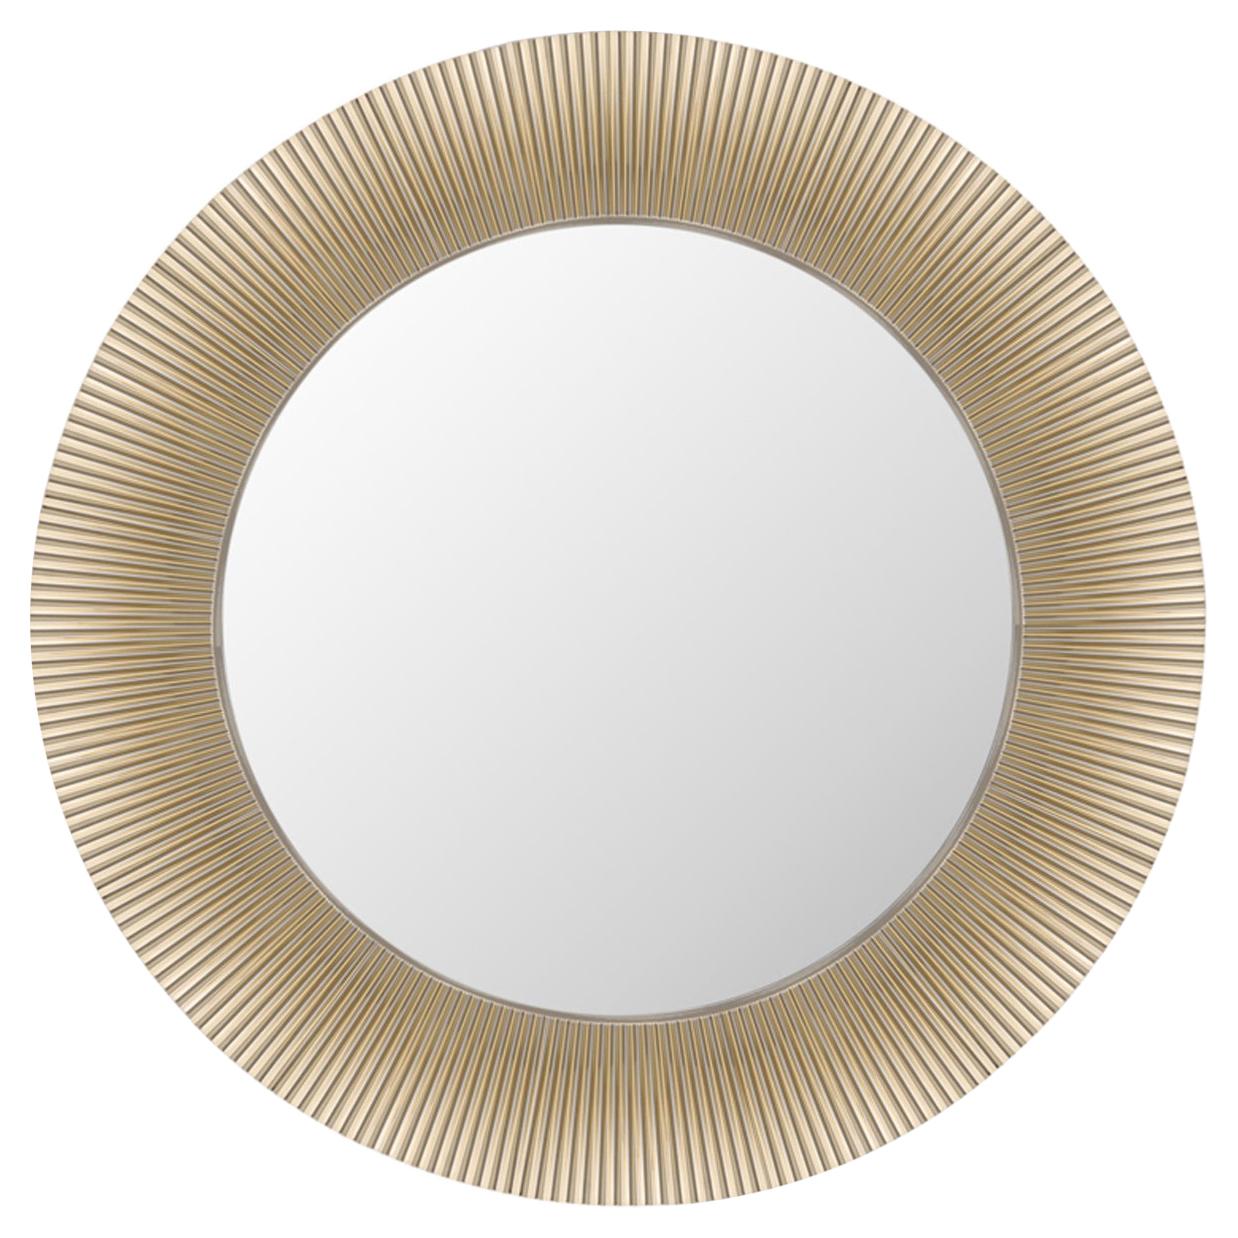 Kartell All Saints Mirror in Gold by Ludovica and Roberto Palomba For Sale